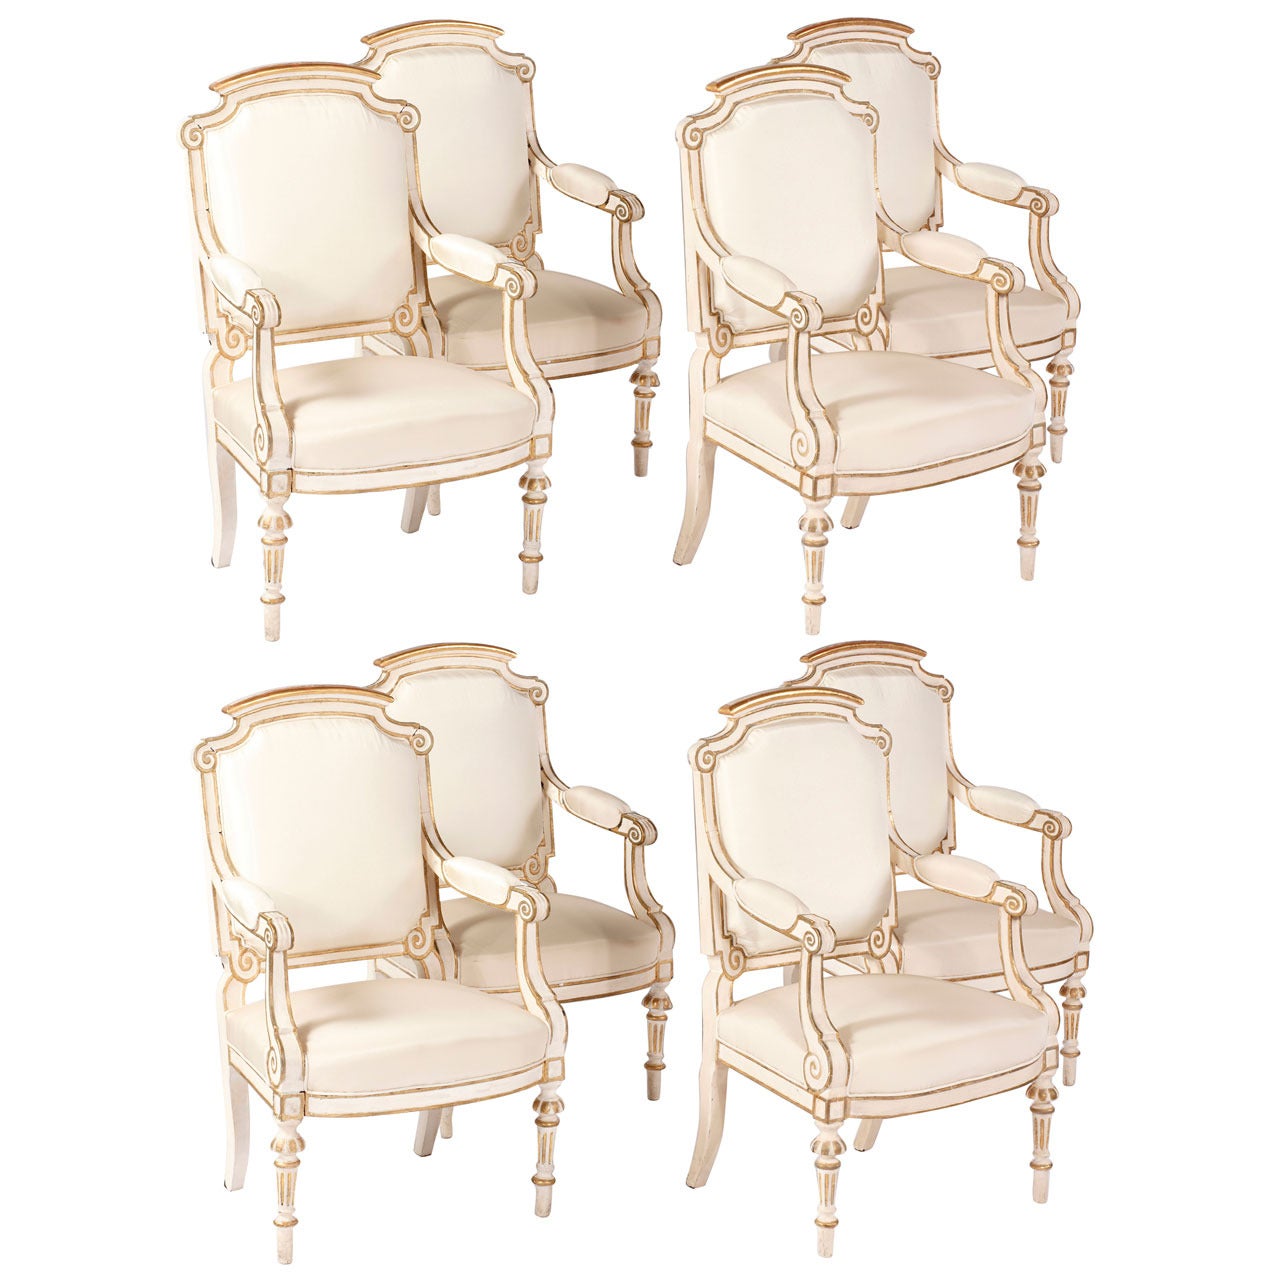 A Set of Eight Italian  Painted & Parcel Gilt Fauteuils, Early 19th Century